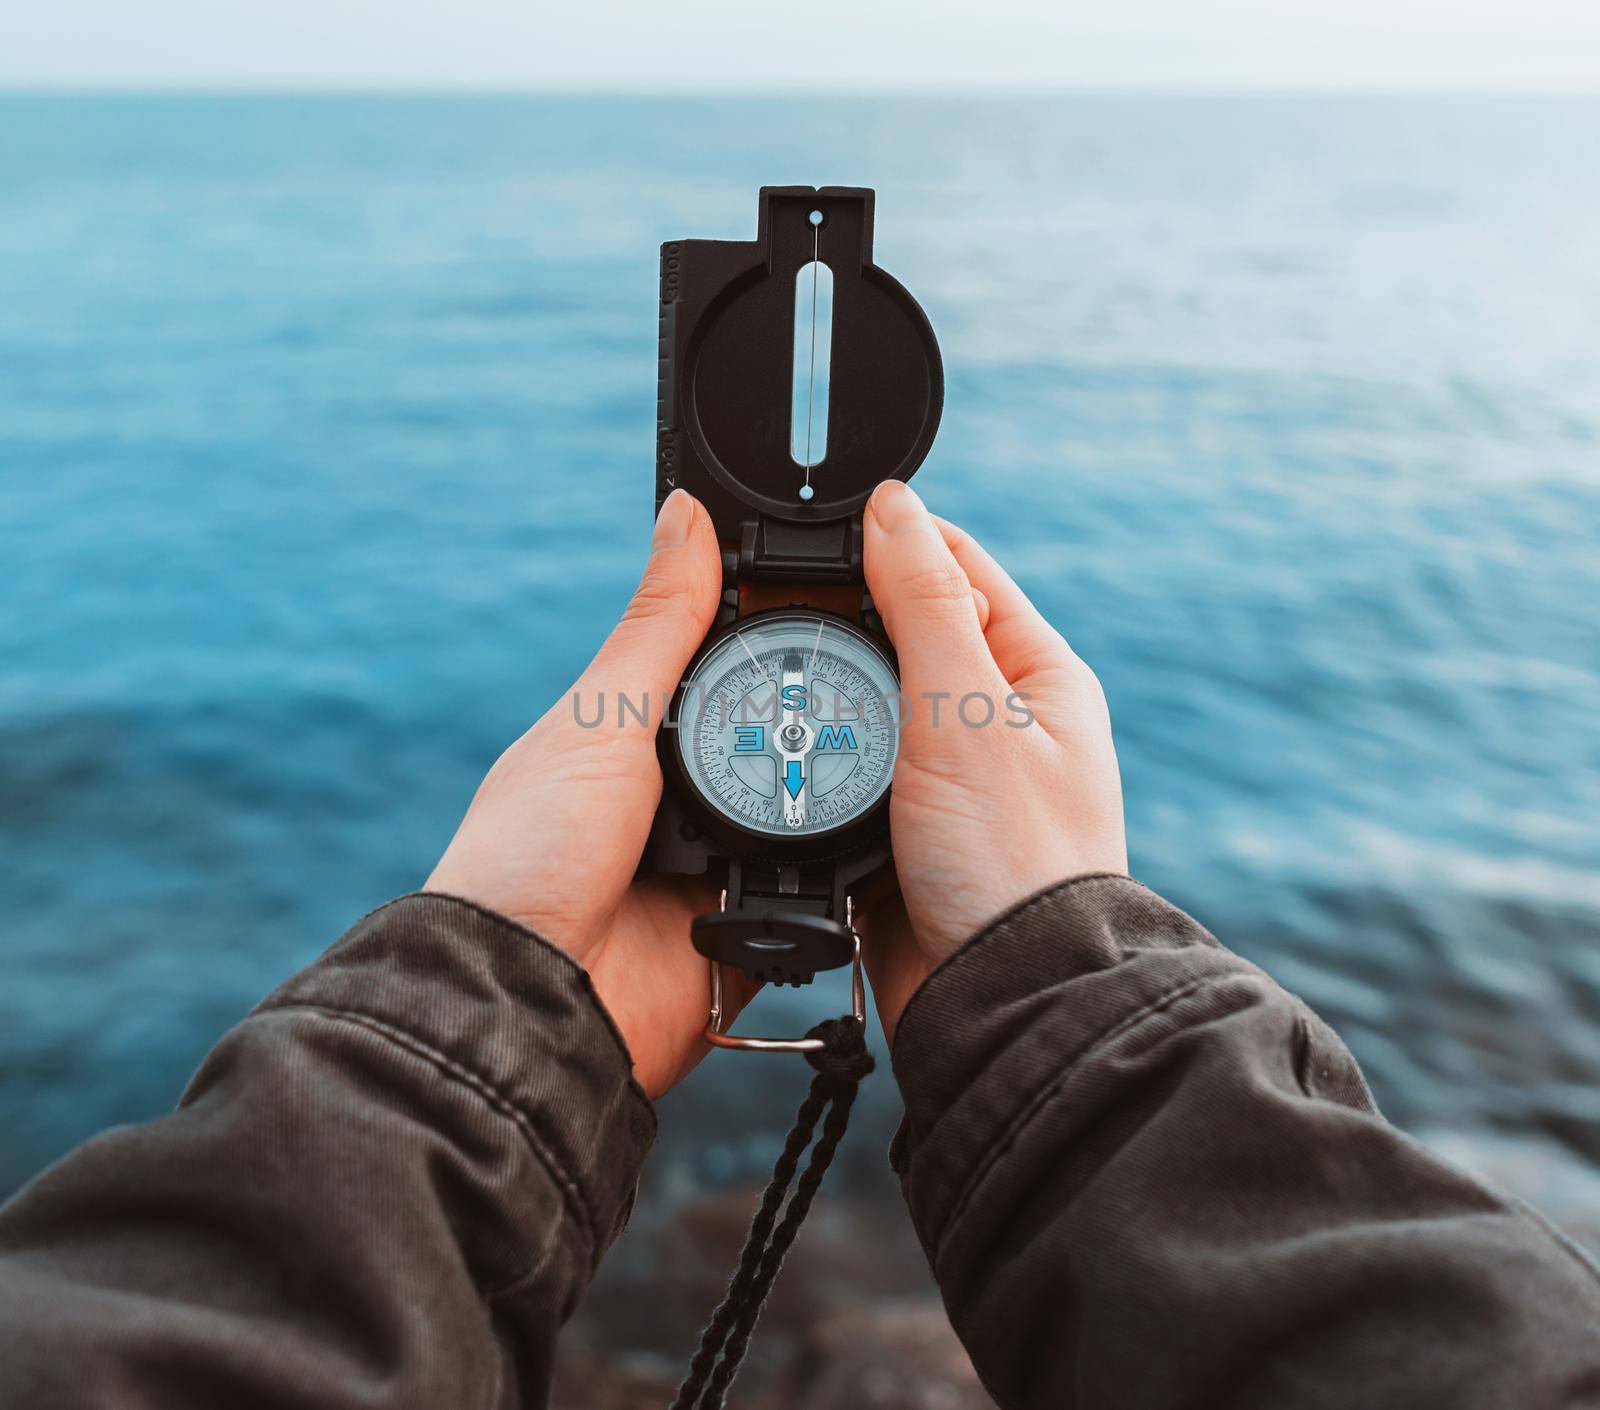 Tourist woman searching direction with a compass on stone coastline near the sea, close-up. Point of view shot.